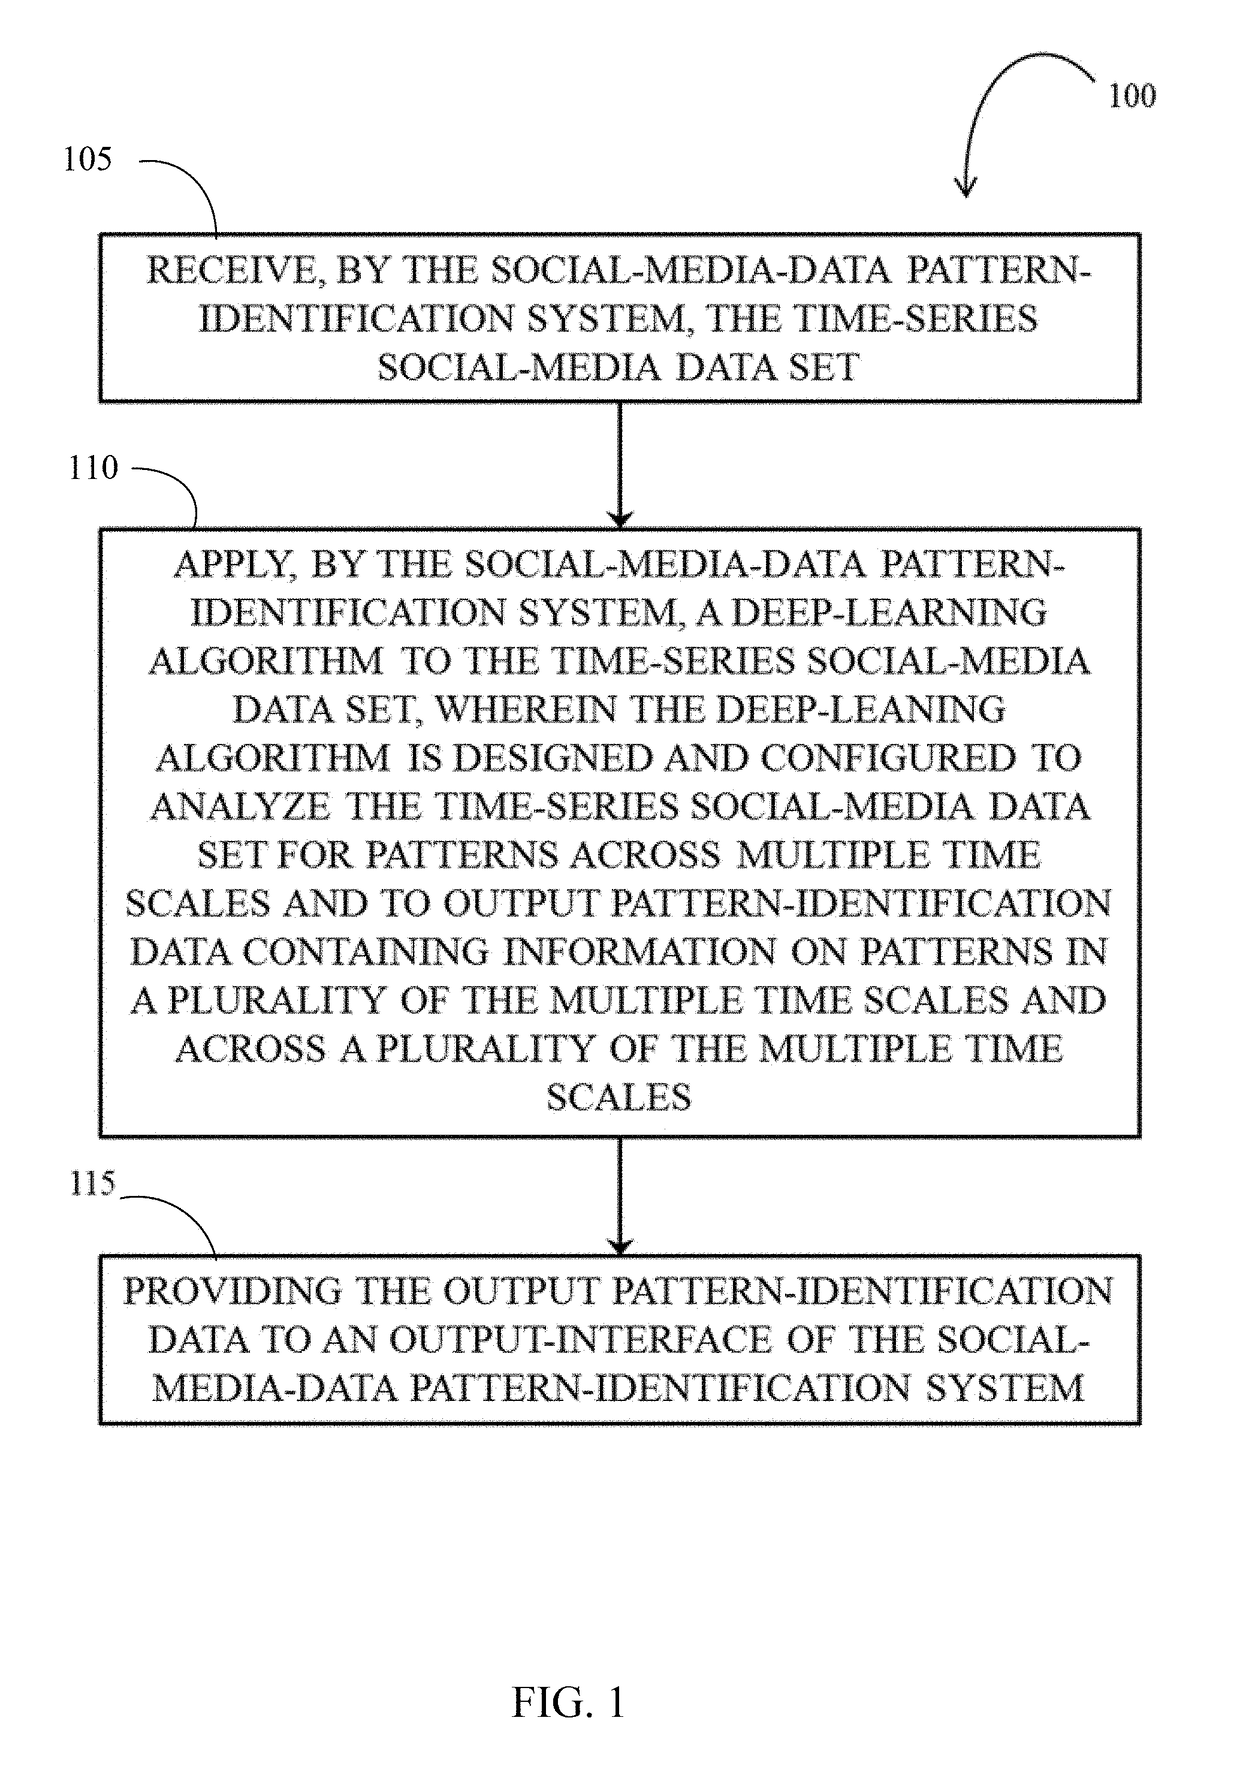 Pattern Identification in Time-Series Social Media Data, and Output-Dynamics Engineering for a Dynamic System Having One or More Multi-Scale Time-Series Data Sets